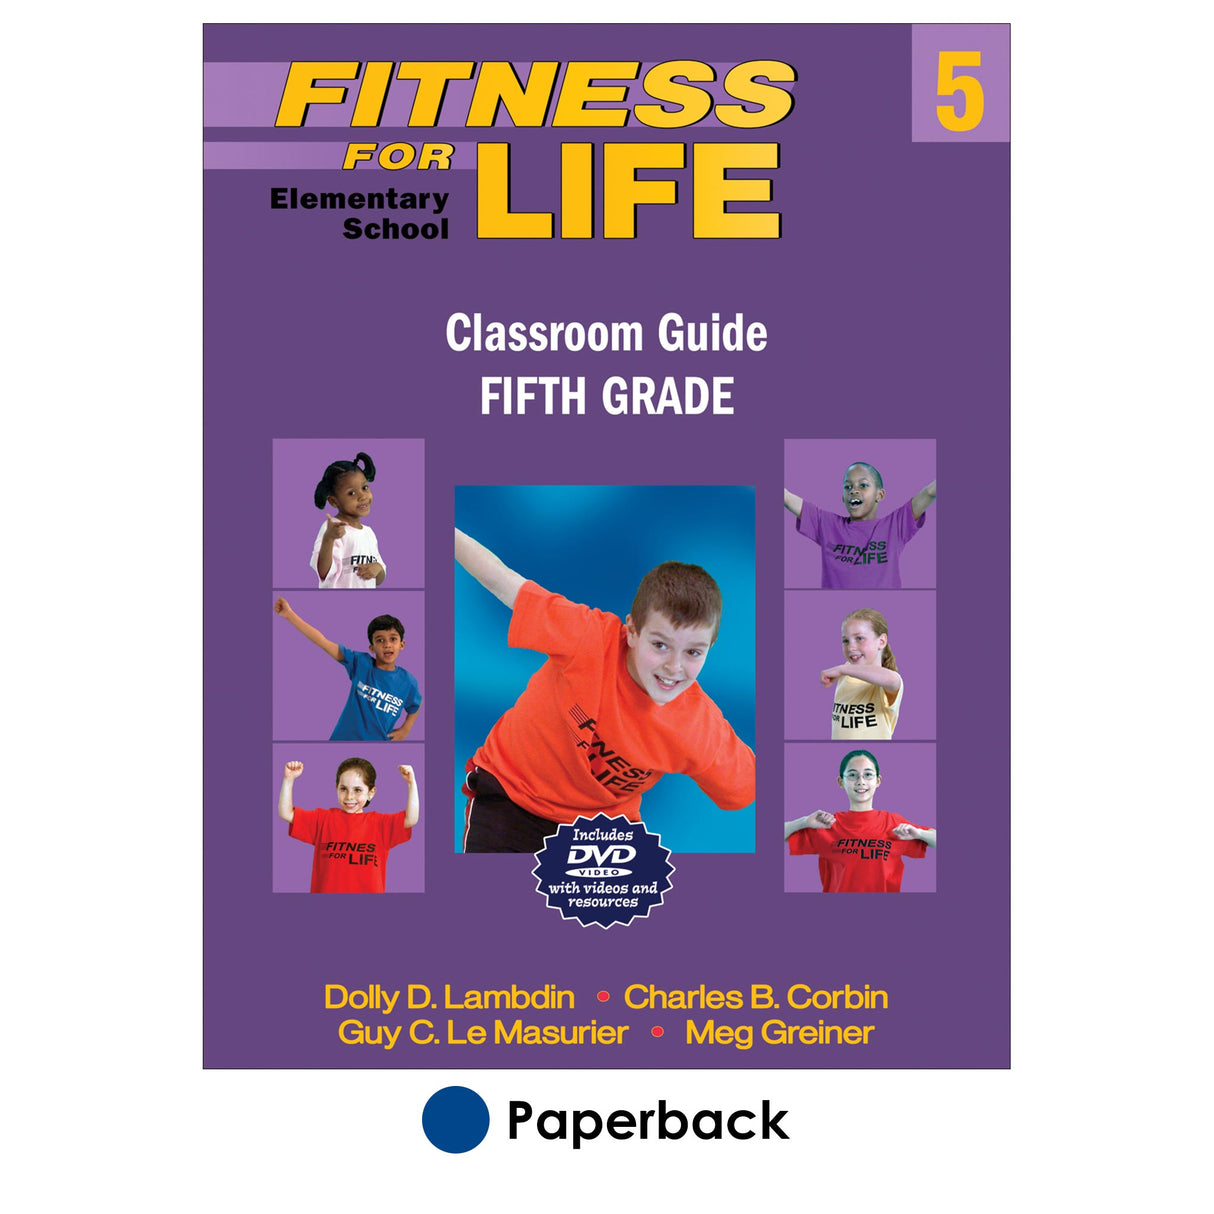 Fitness for Life Elementary School Classroom Guide: Fifth Grade